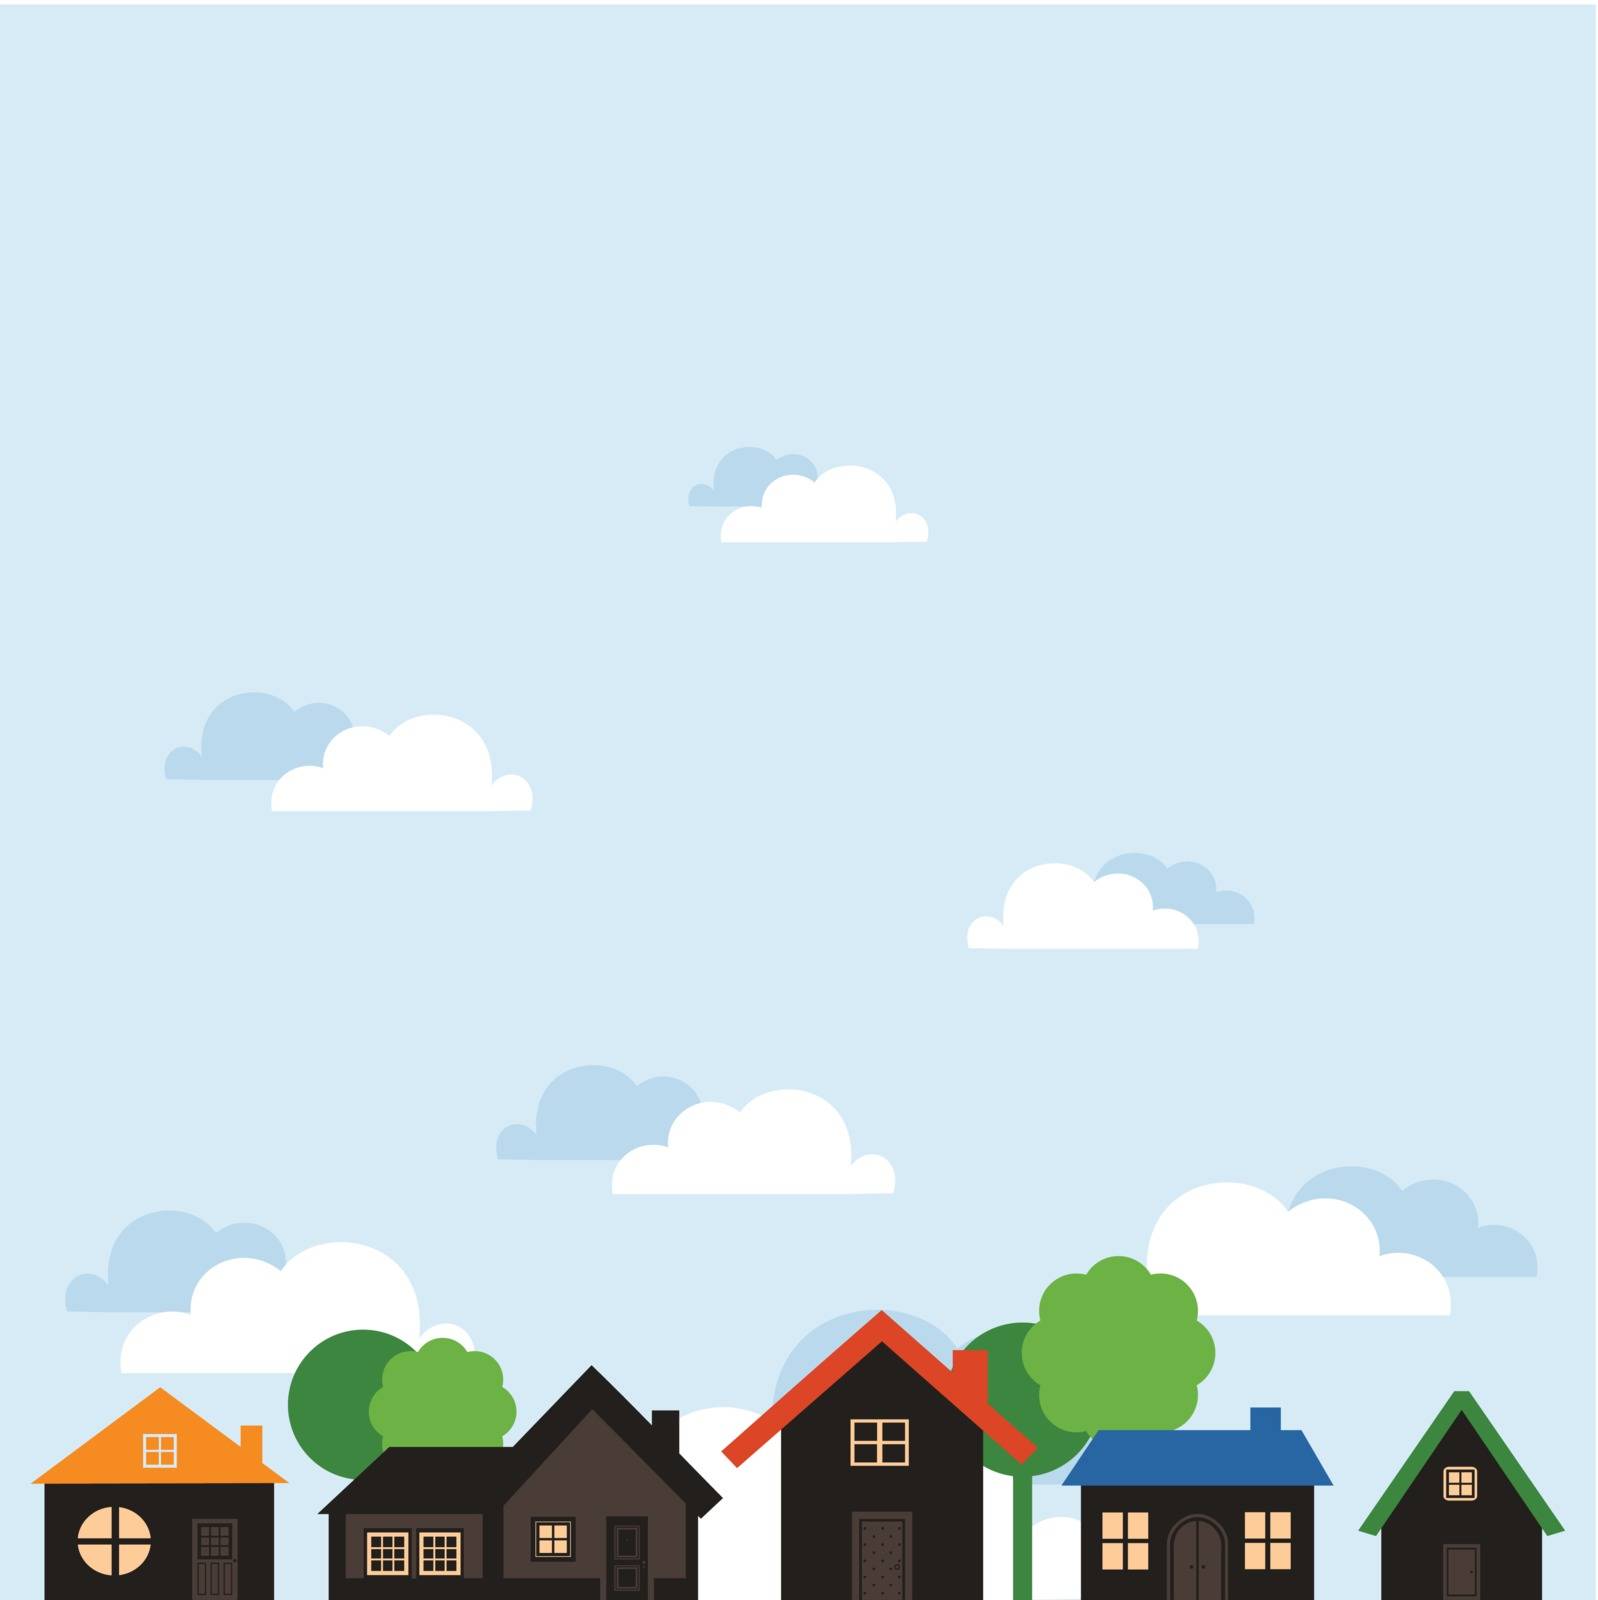 One-storeyed houses against the sky. A vector illustration